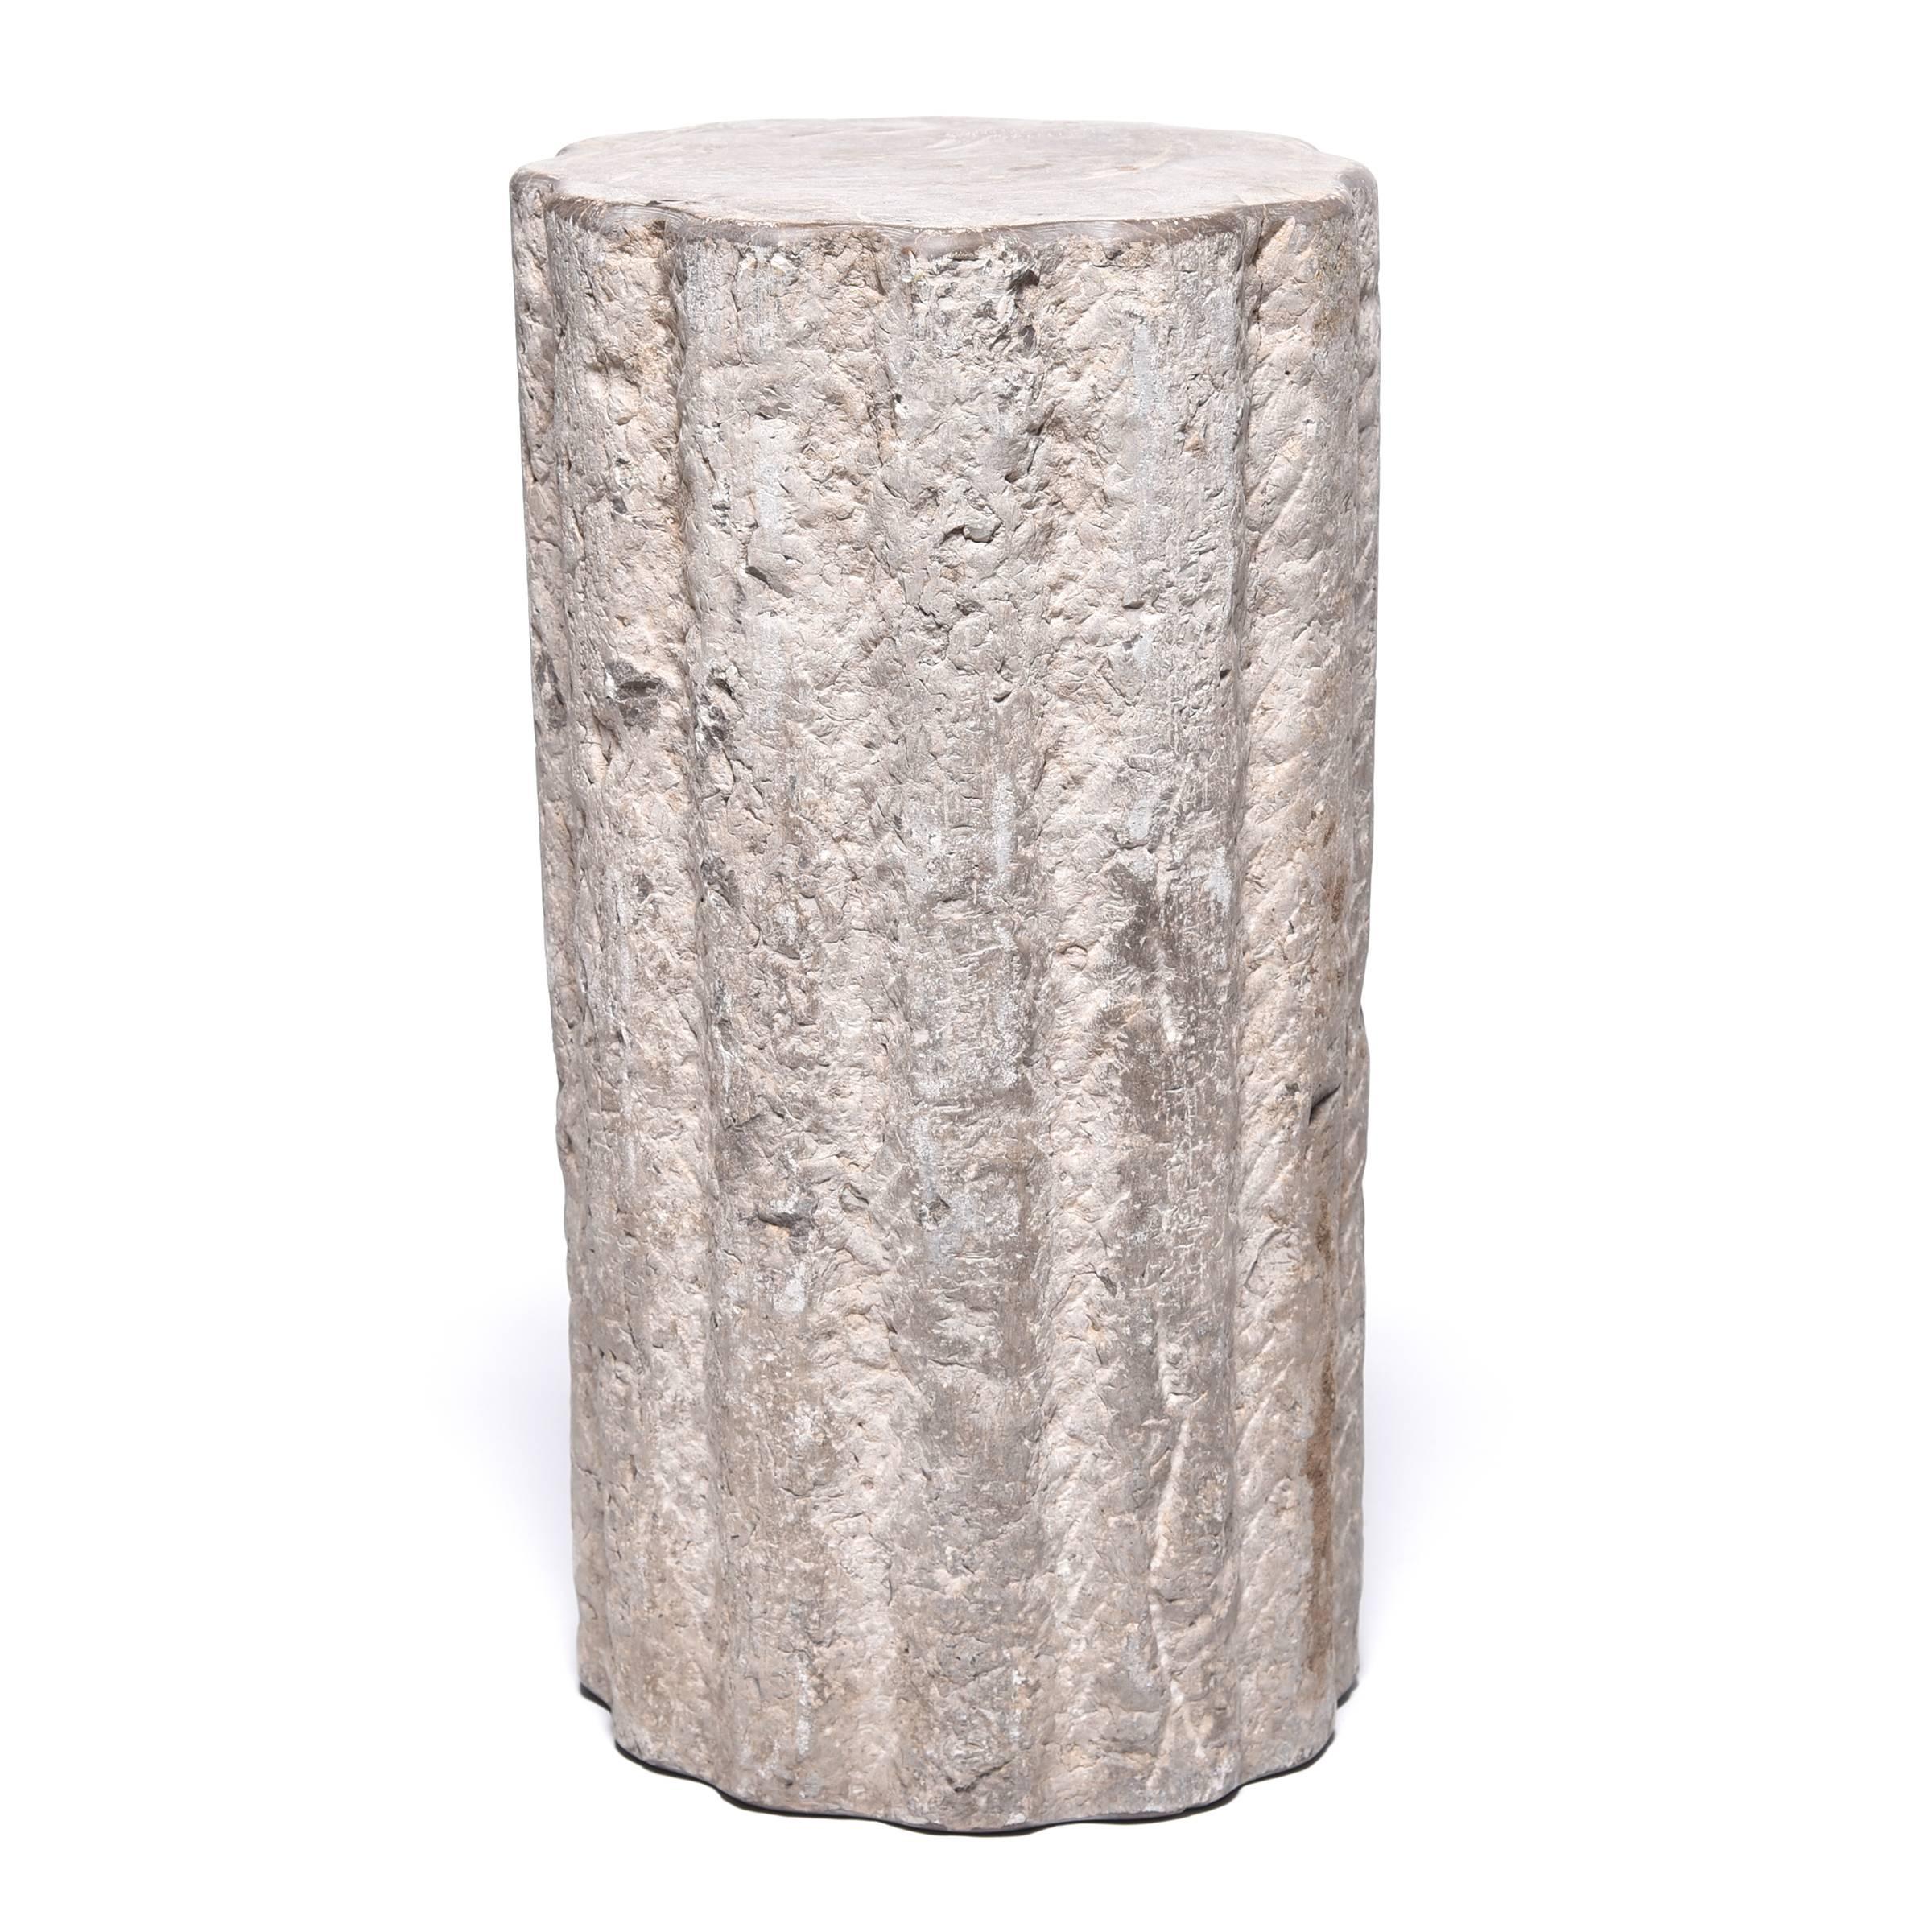 Chinese mill stone with its textured and ribbed surface this hand-carved stone once ground grain and nuts at a Hebei province wind or watermill. Over 100 years old, the stone’s surface has worn down through use, leaving only a hint of its original